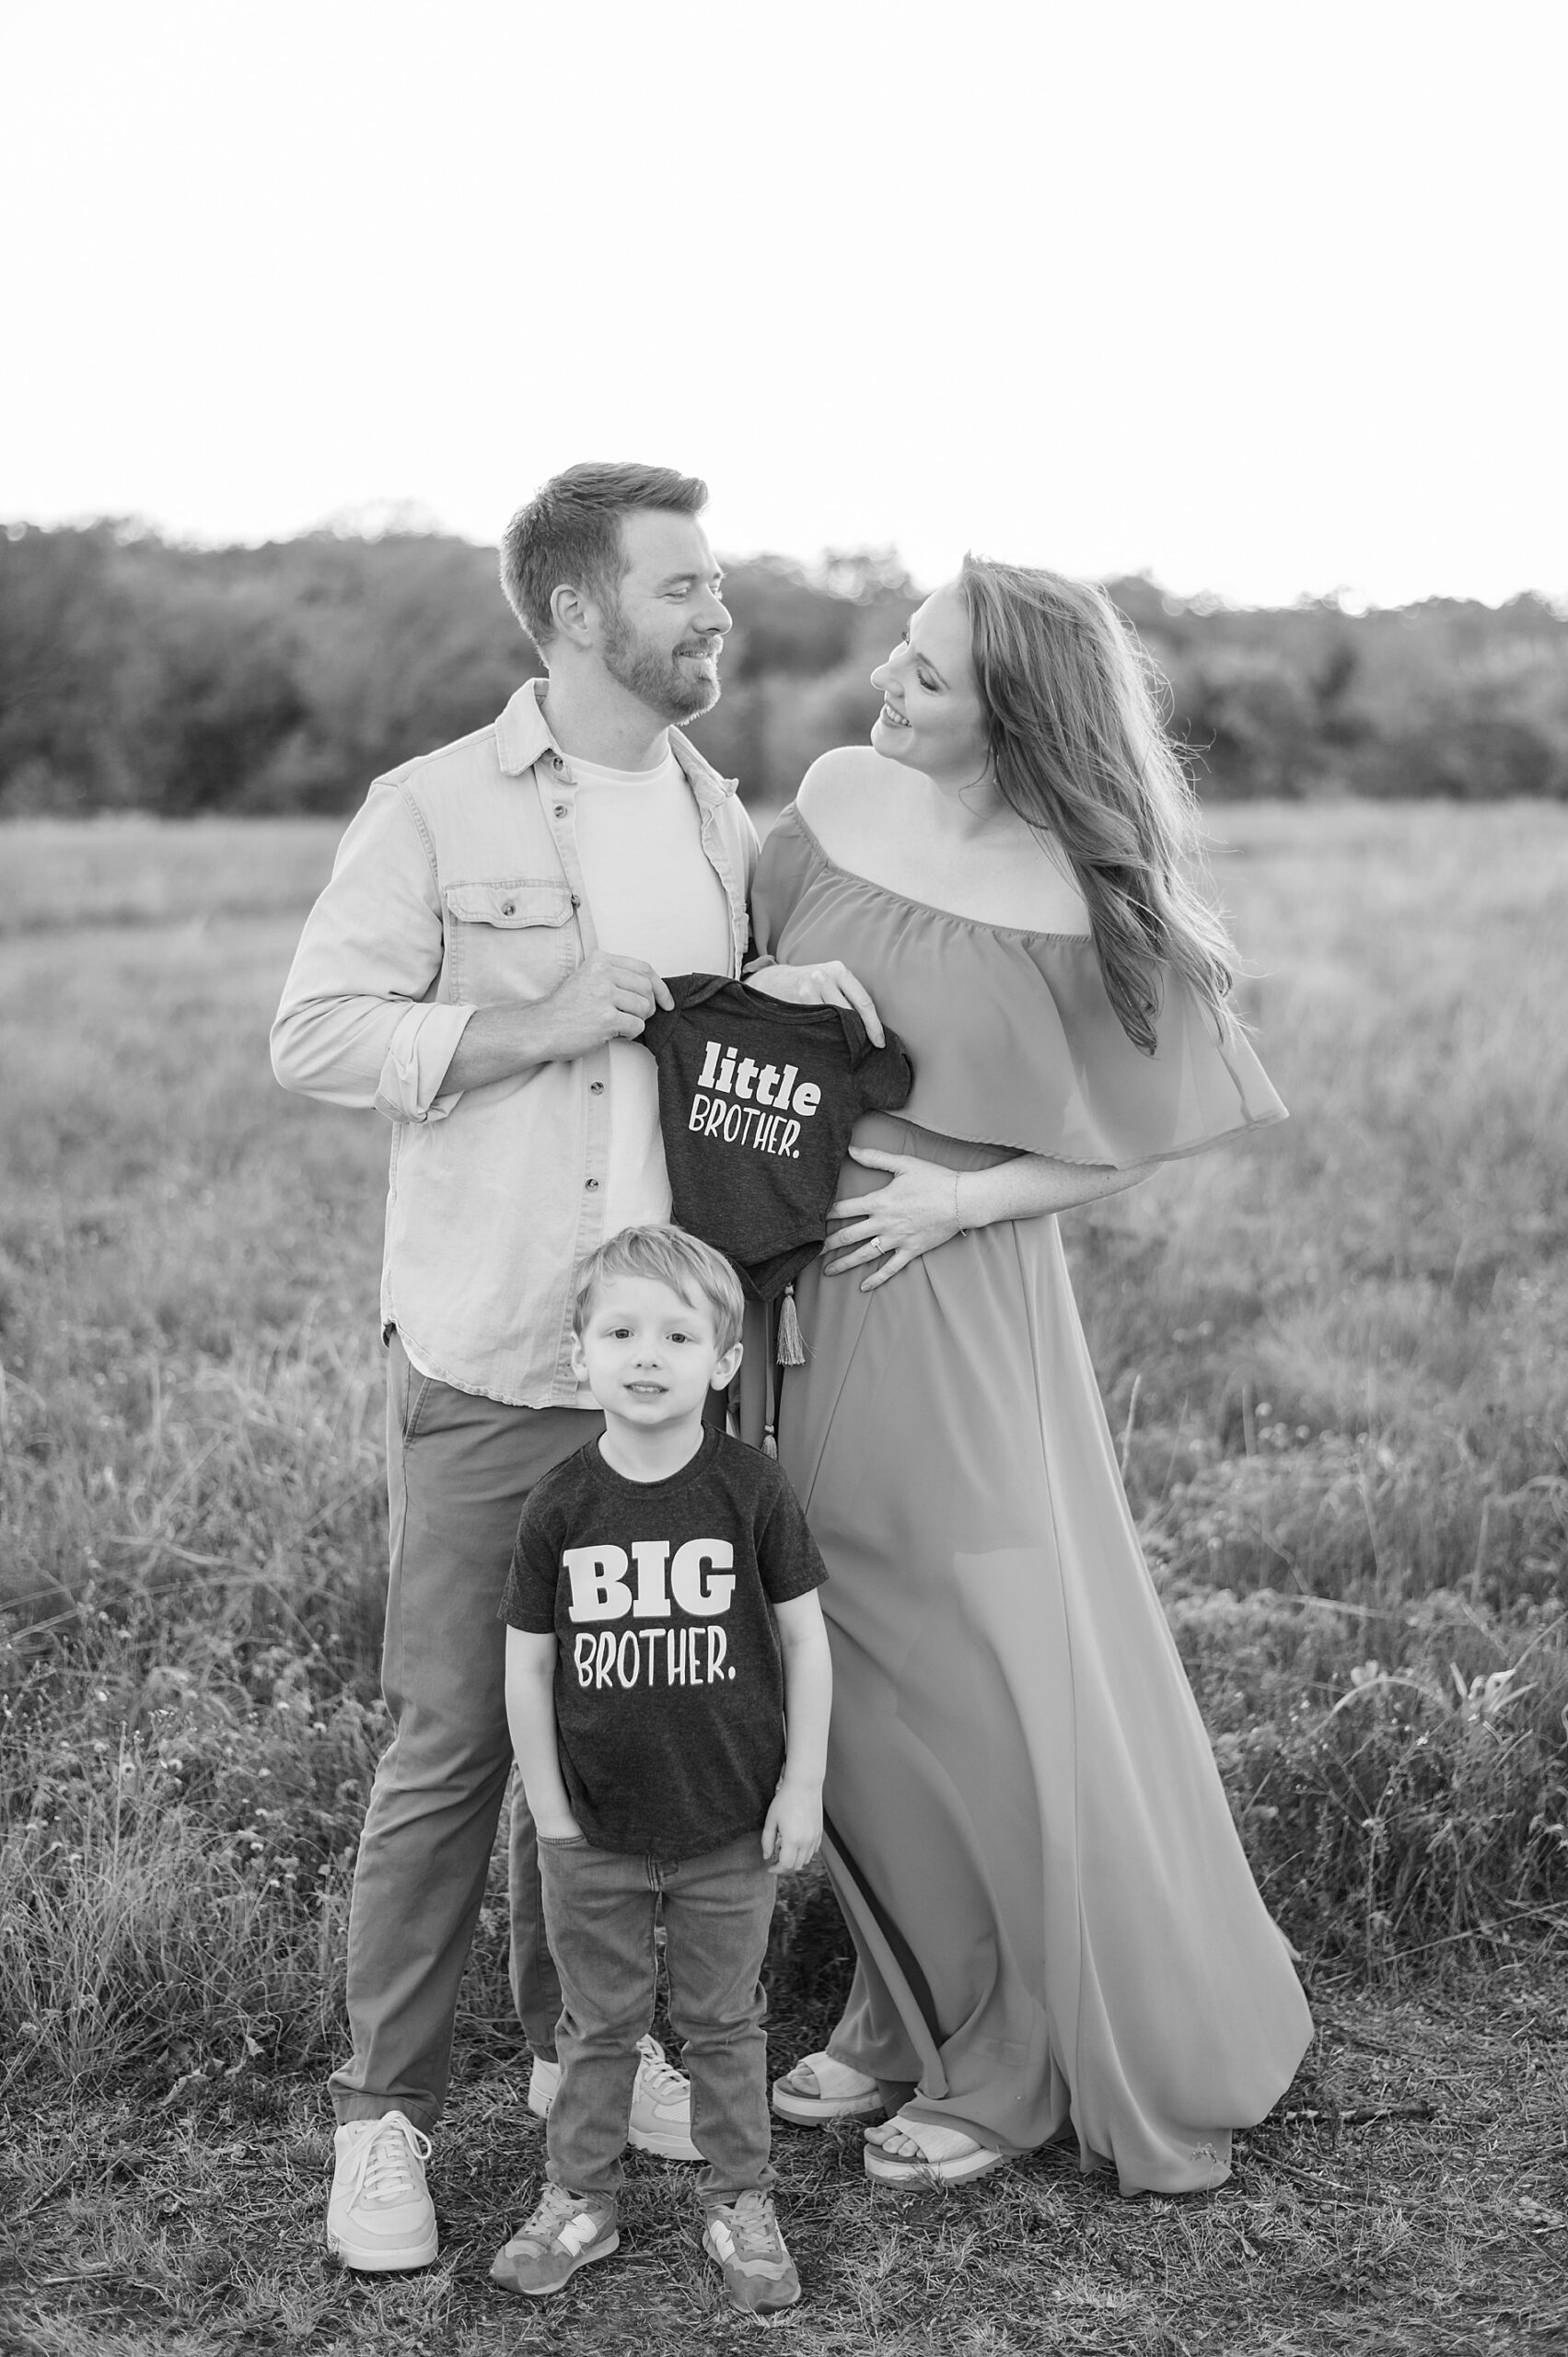 pregnancy announcement photoshoot with "big brother" "little brother" shirts photographed by Lindsey Dutton Photography, a Dallas maternity photographer
